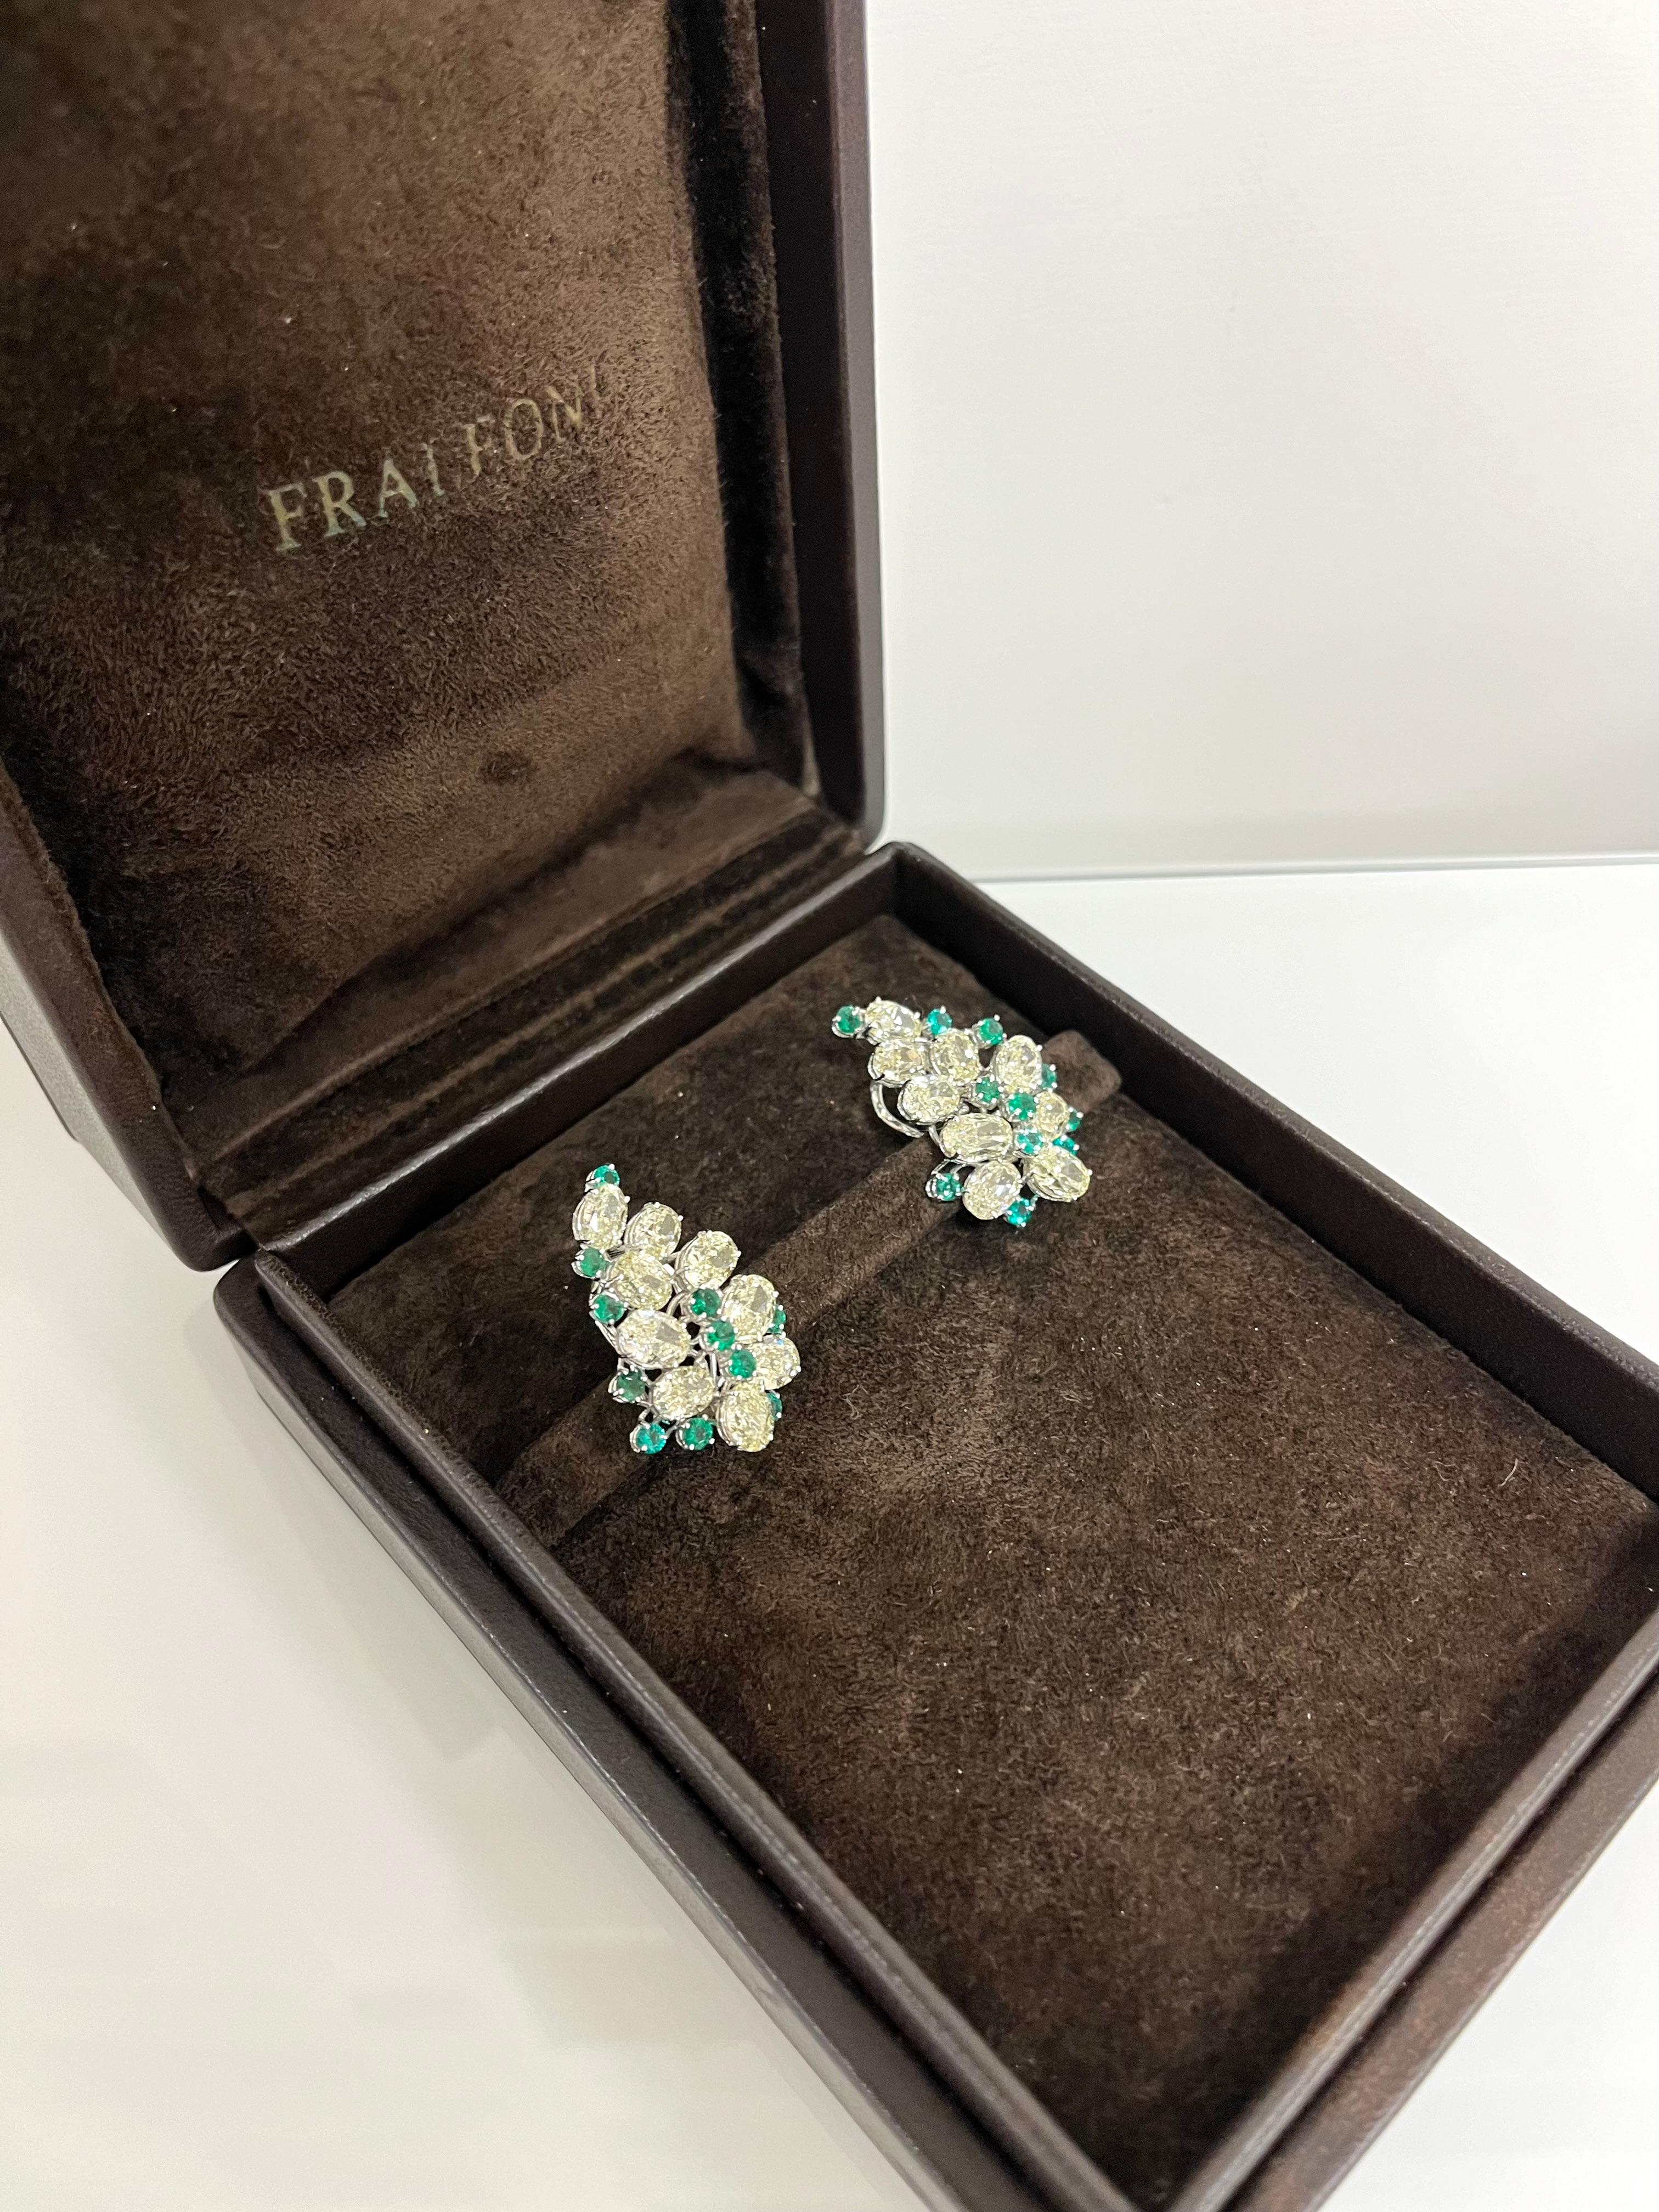 Fraleoni 18 Kt. White Gold Diamonds Emeralds Clip-on earrings In New Condition For Sale In Rome, IT